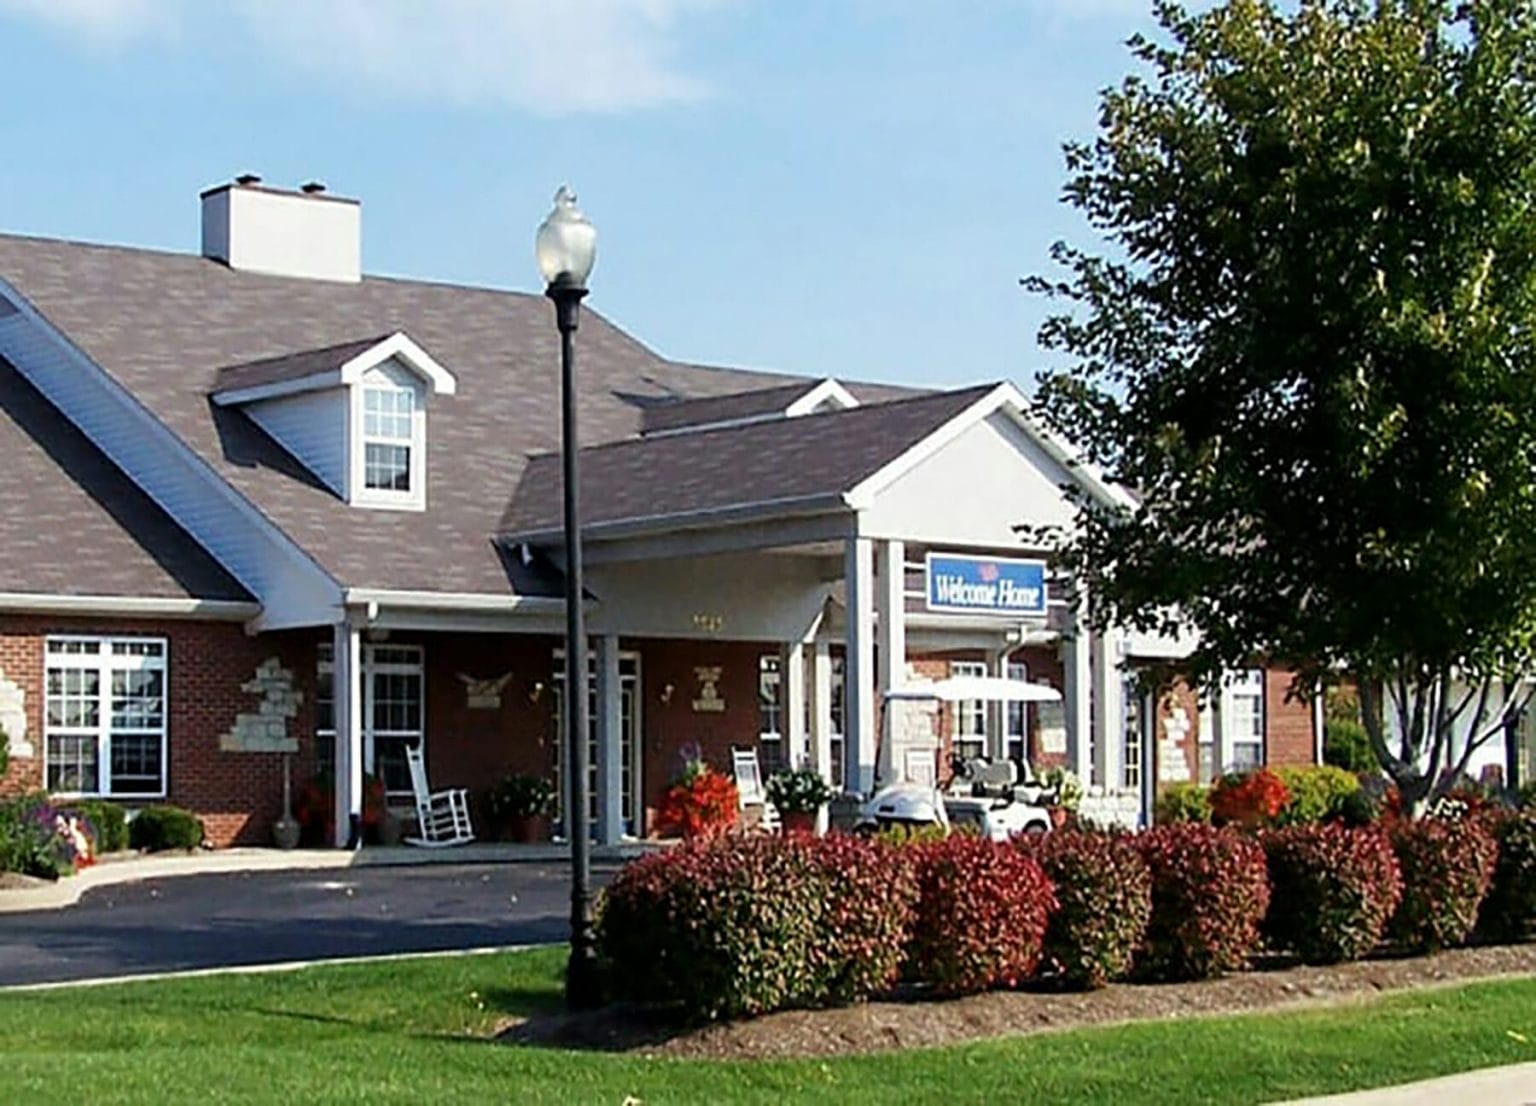 Outside of the main entrance at Rosegate Assisted Living building.